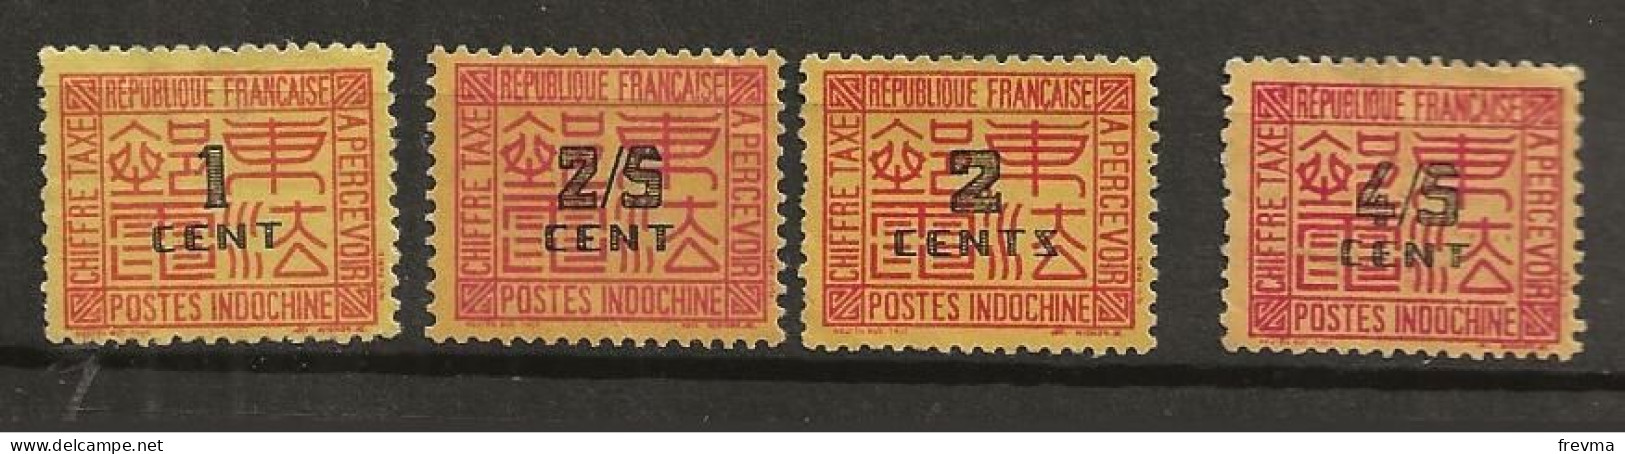 Timbre Poste Indochine Taxe Republique Francaise 1931-1941 - Strafport